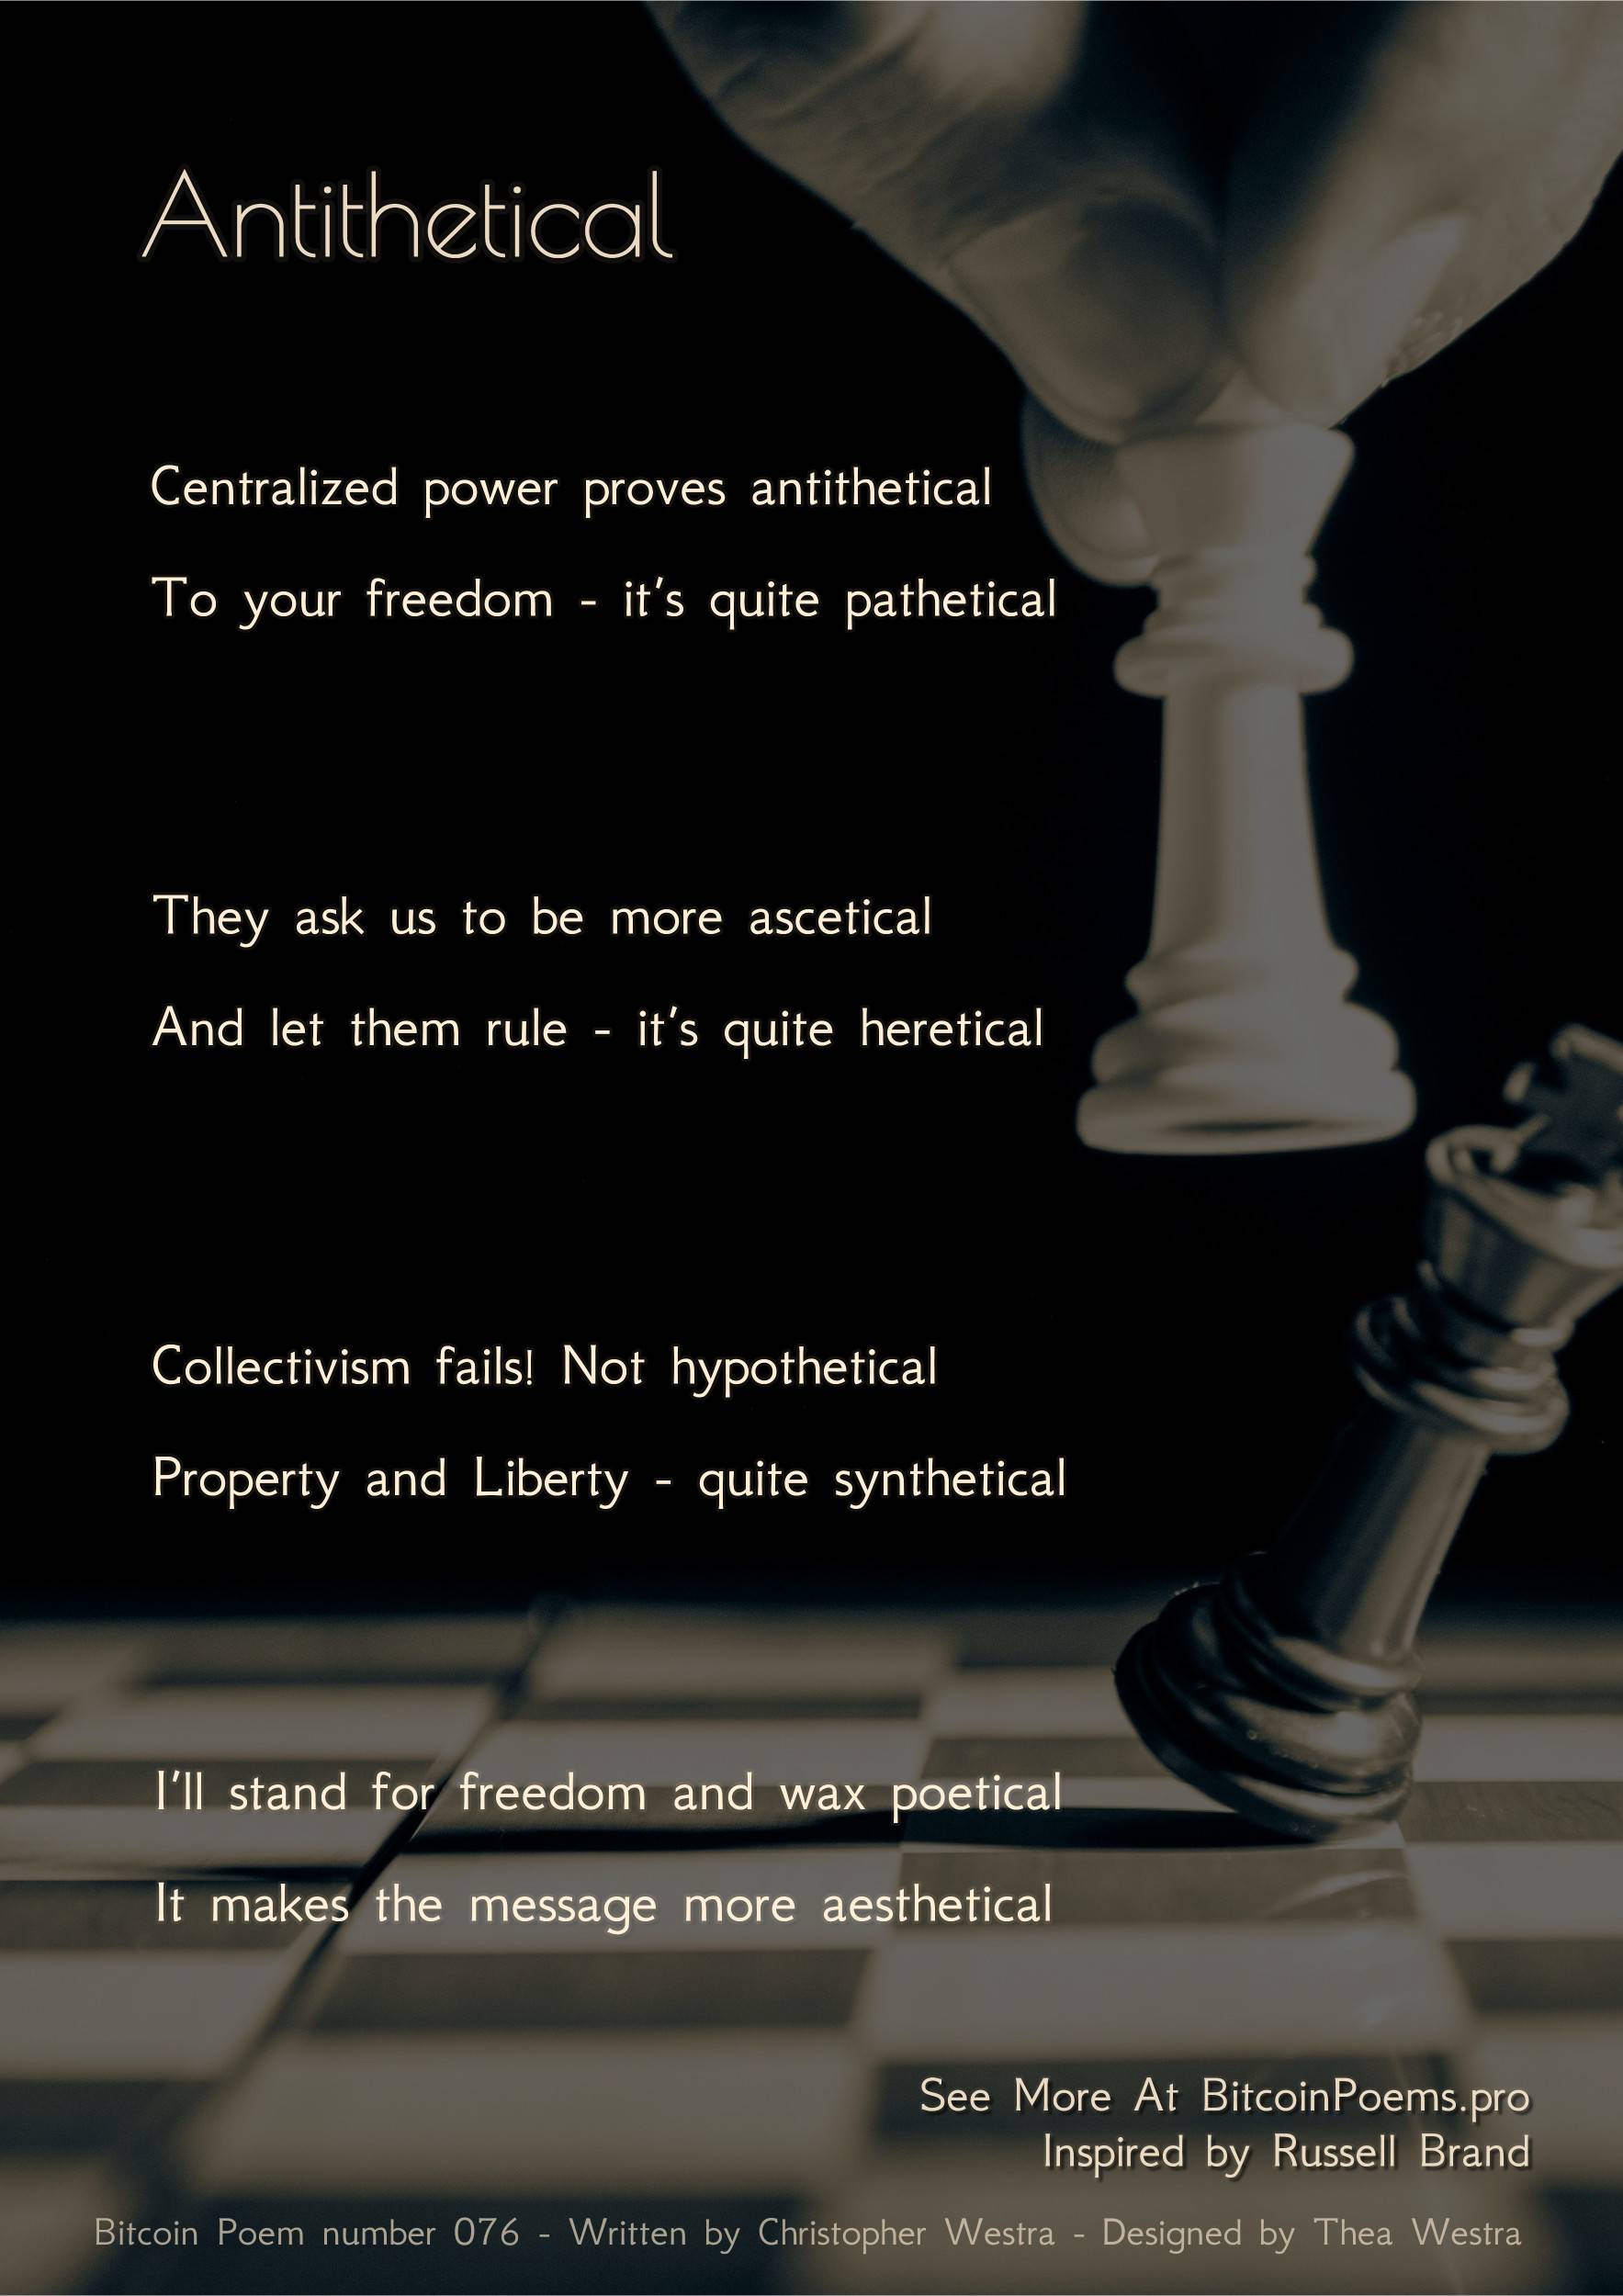 Antithetical - Bitcoin Poem 076 by Christopher Westra